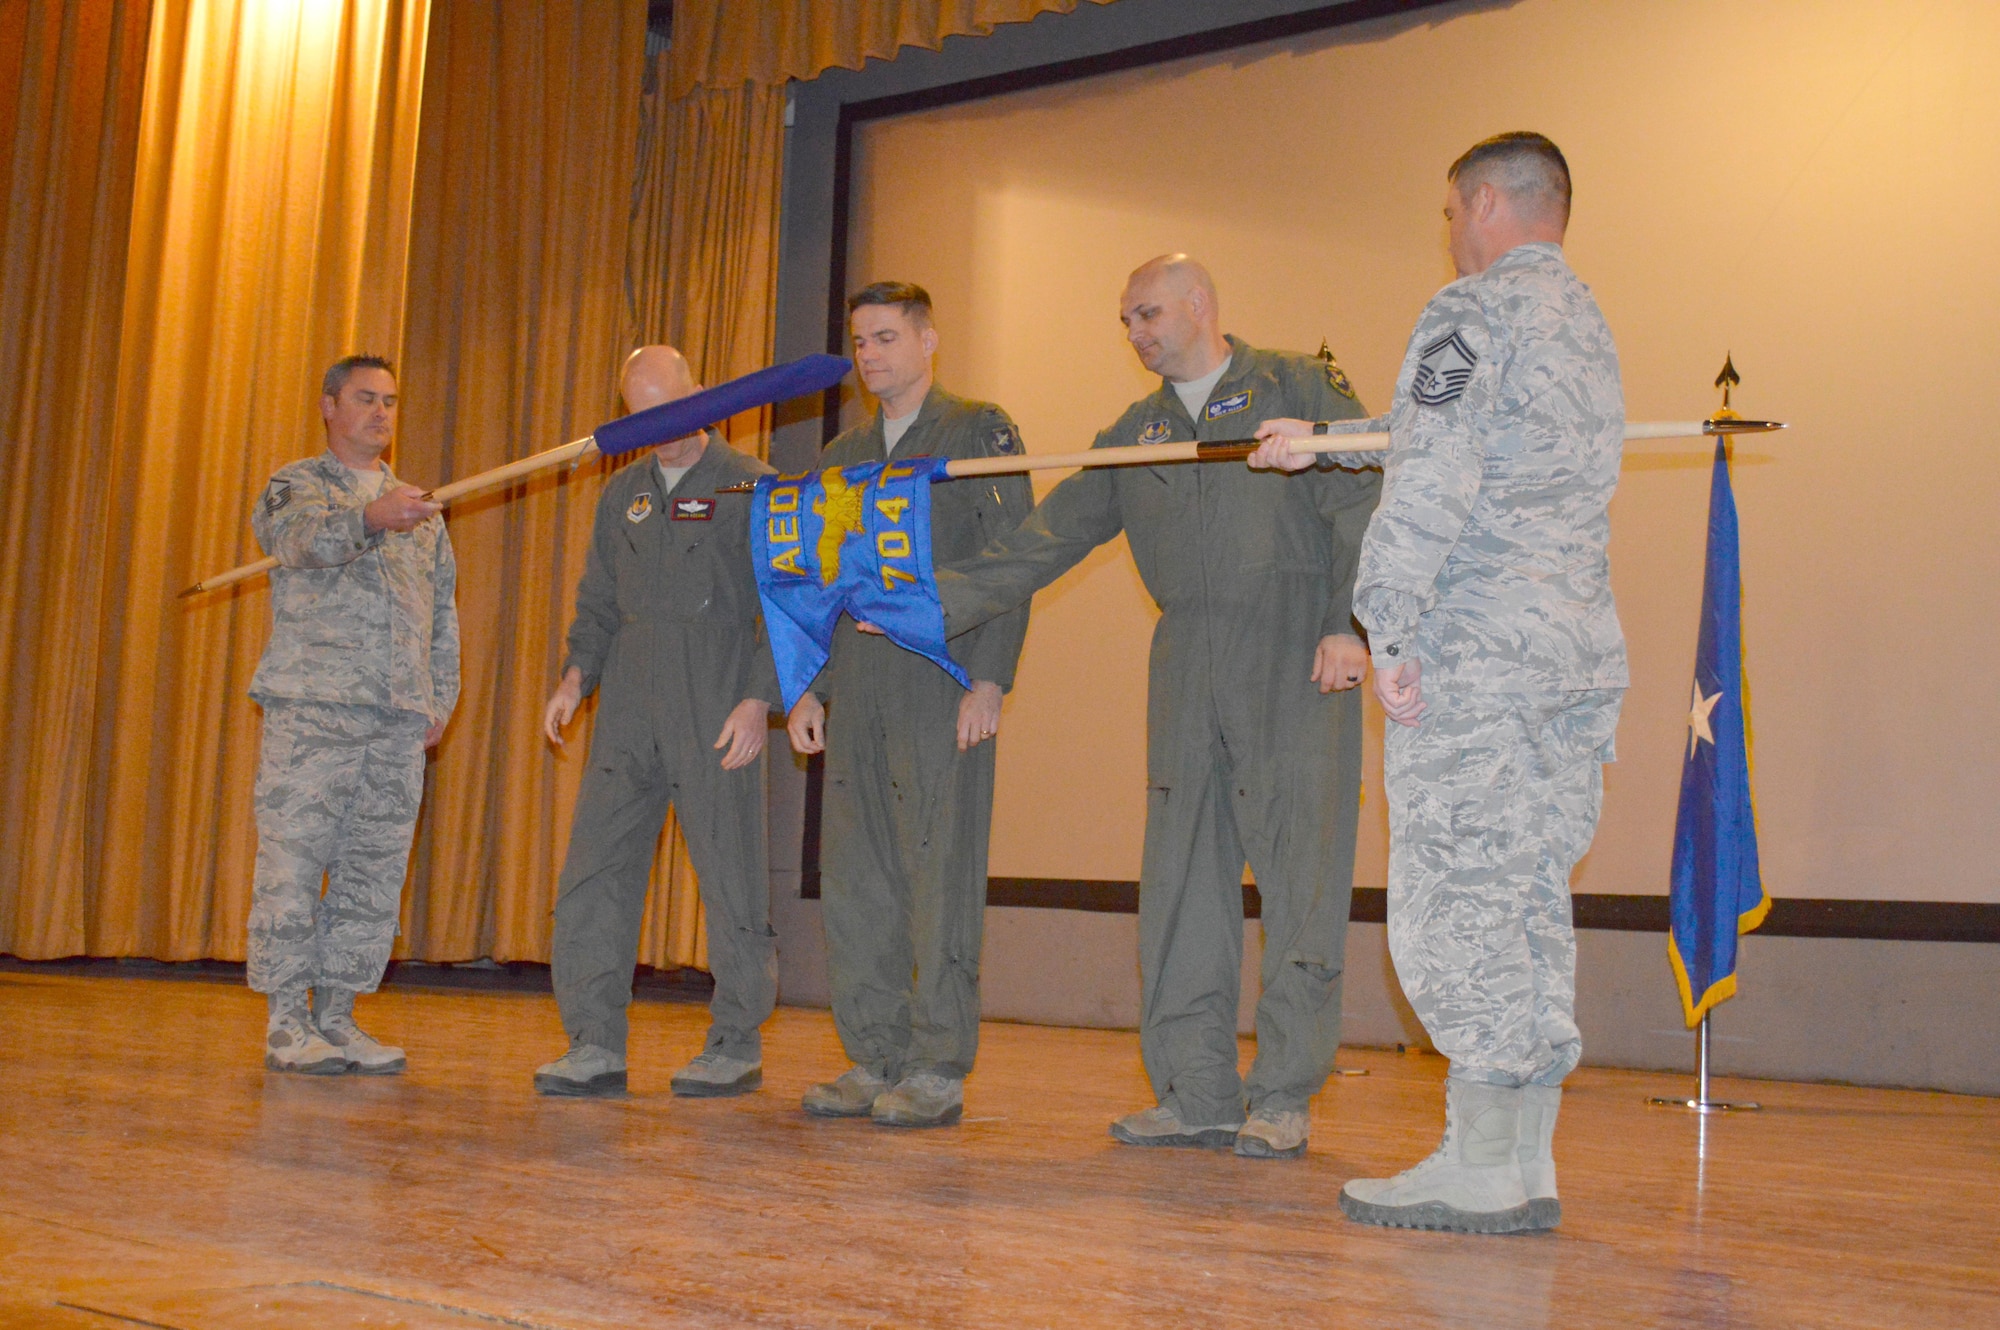 AEDC Commander Col. Rodney Todaro, center, observes while Col. Andrew L. Allen, (fourth from right), the 704th Test Group commander reveals the 704th Test Group guidon during a re-designation ceremony Dec. 6 at Holloman Air Force Base, New Mexico. The Test Group was previously the 96th Test Group under the 96th Test Wing, Eglin AFB, Florida. Also pictured left to right is flag bearer Master Sgt. Marc Berger, 96th Test Wing Commander Brig. Gen. Christopher Azzano and flag bearer Senior Master Sgt. Ian Hall. (U.S. Air Force photo/Tech. Sgt. Dejaye Herrera)